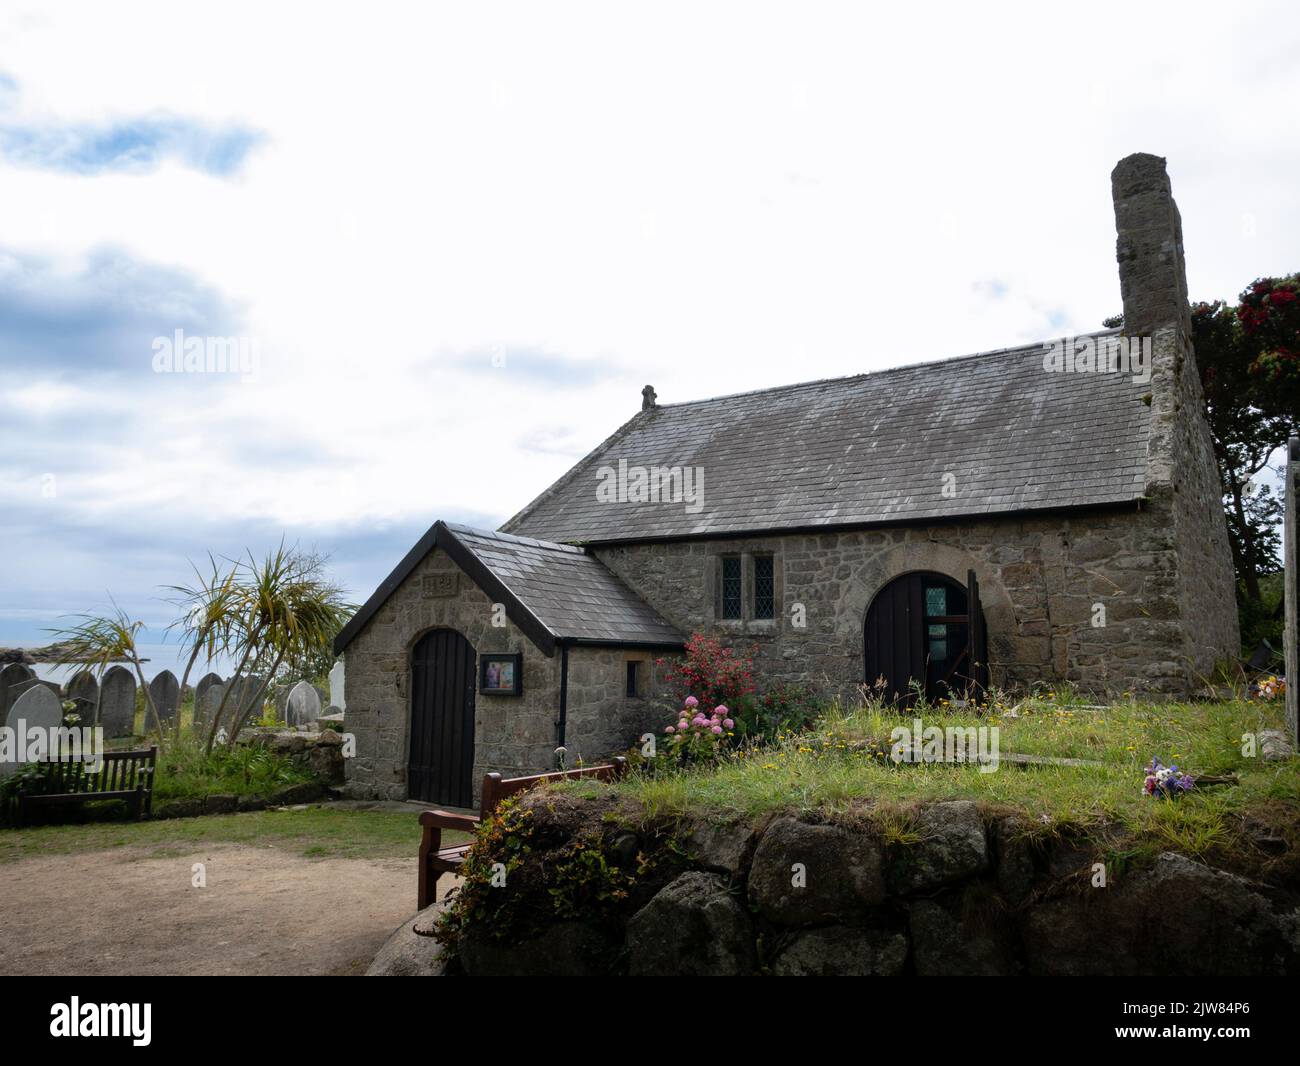 The Church of St Mary the Virgin, Old Town, St Mary's, Isles of Scilly, Cornwall, England, UK. Stock Photo